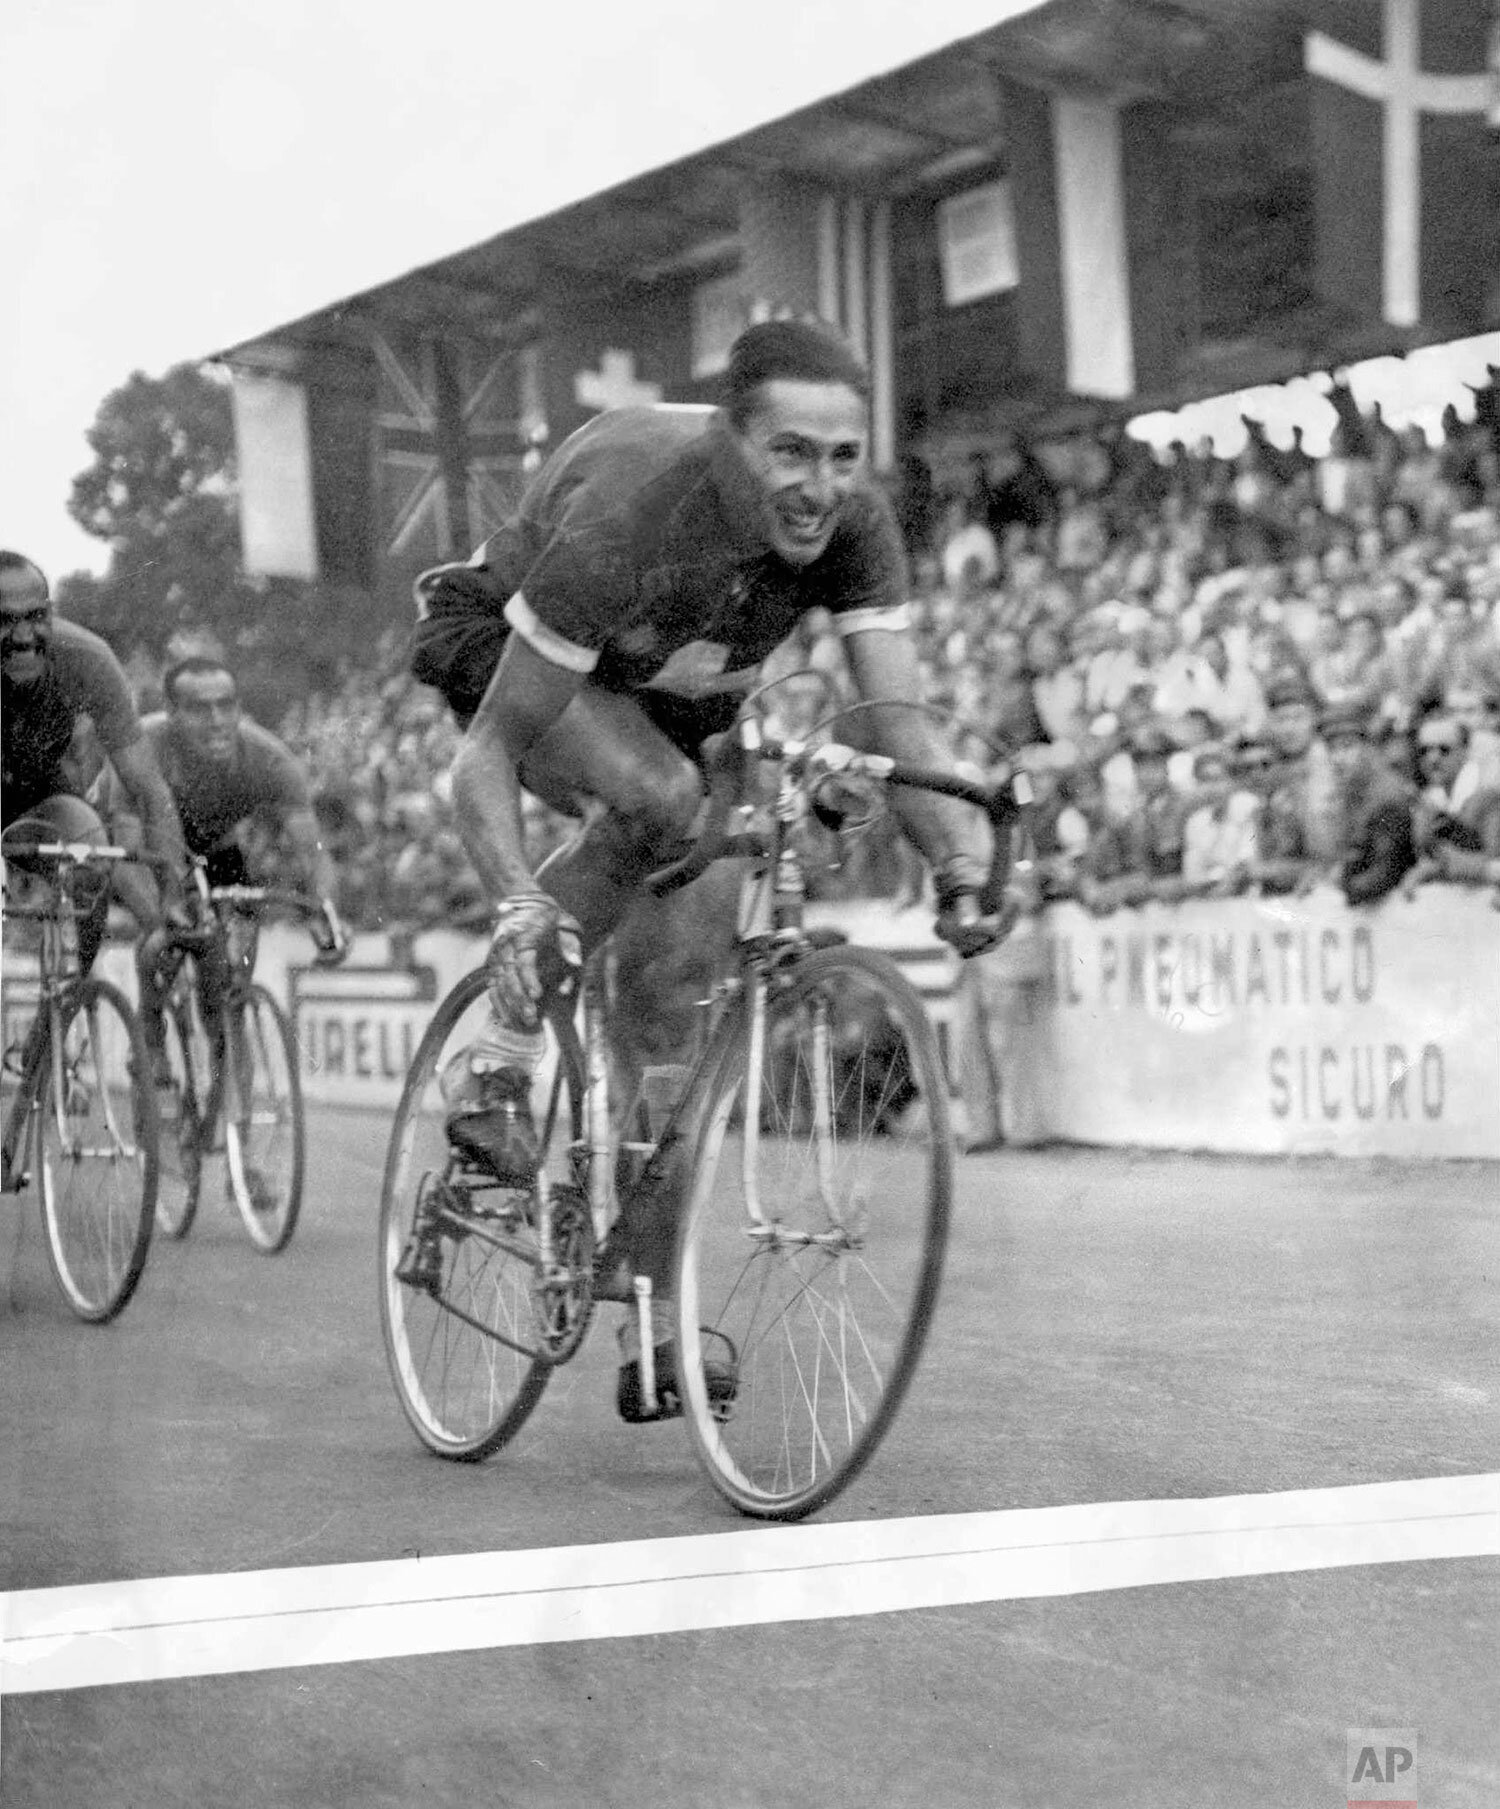  Swiss cycling legend Ferdi Kuebler wins the Street Cycling World Cup with a sprint finish in Varese, Italy, in 1951. (AP Photo) 